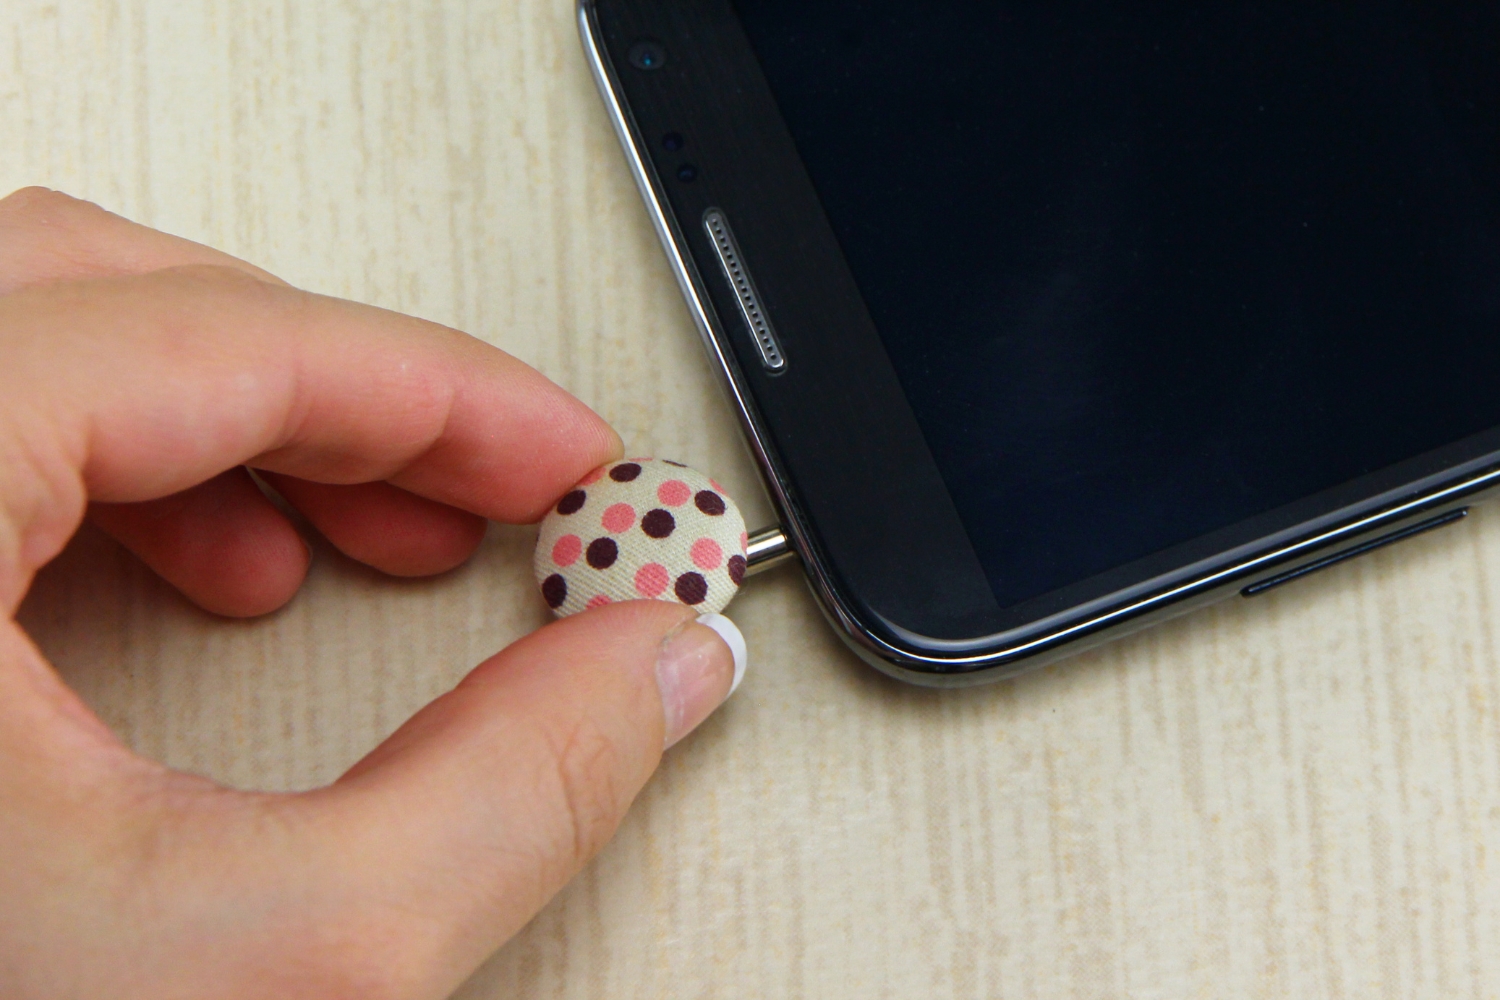 attaching-a-phone-charm-to-your-phone-case